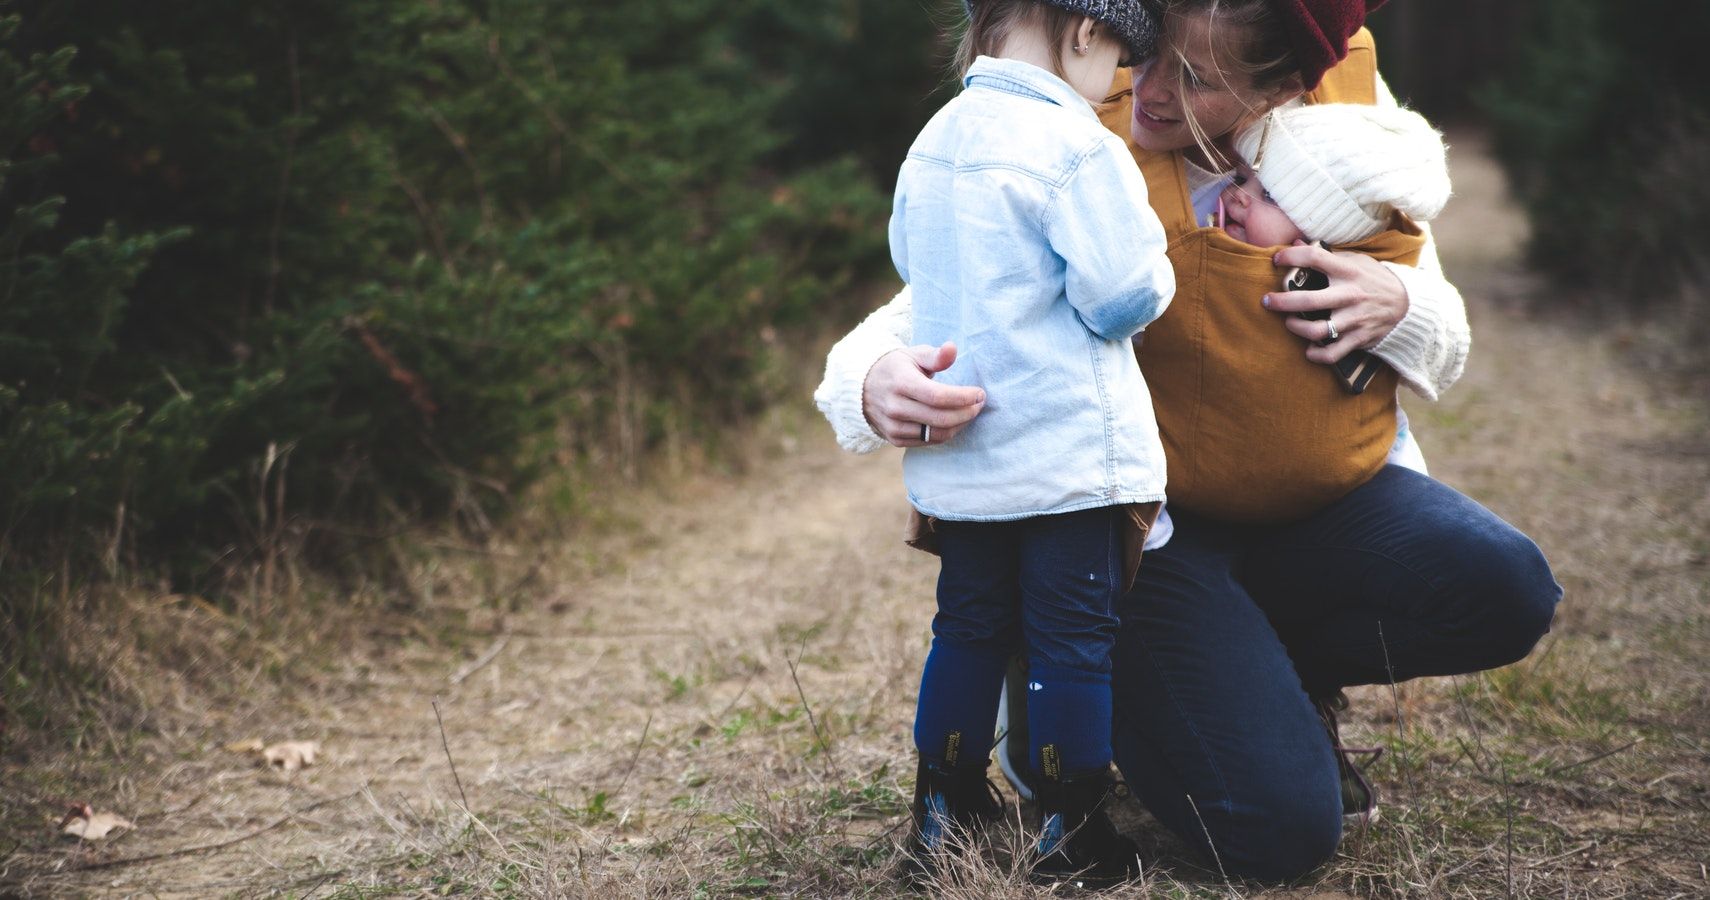 Proactive Parenting Vs. Reactive Parenting: What You Need To Know